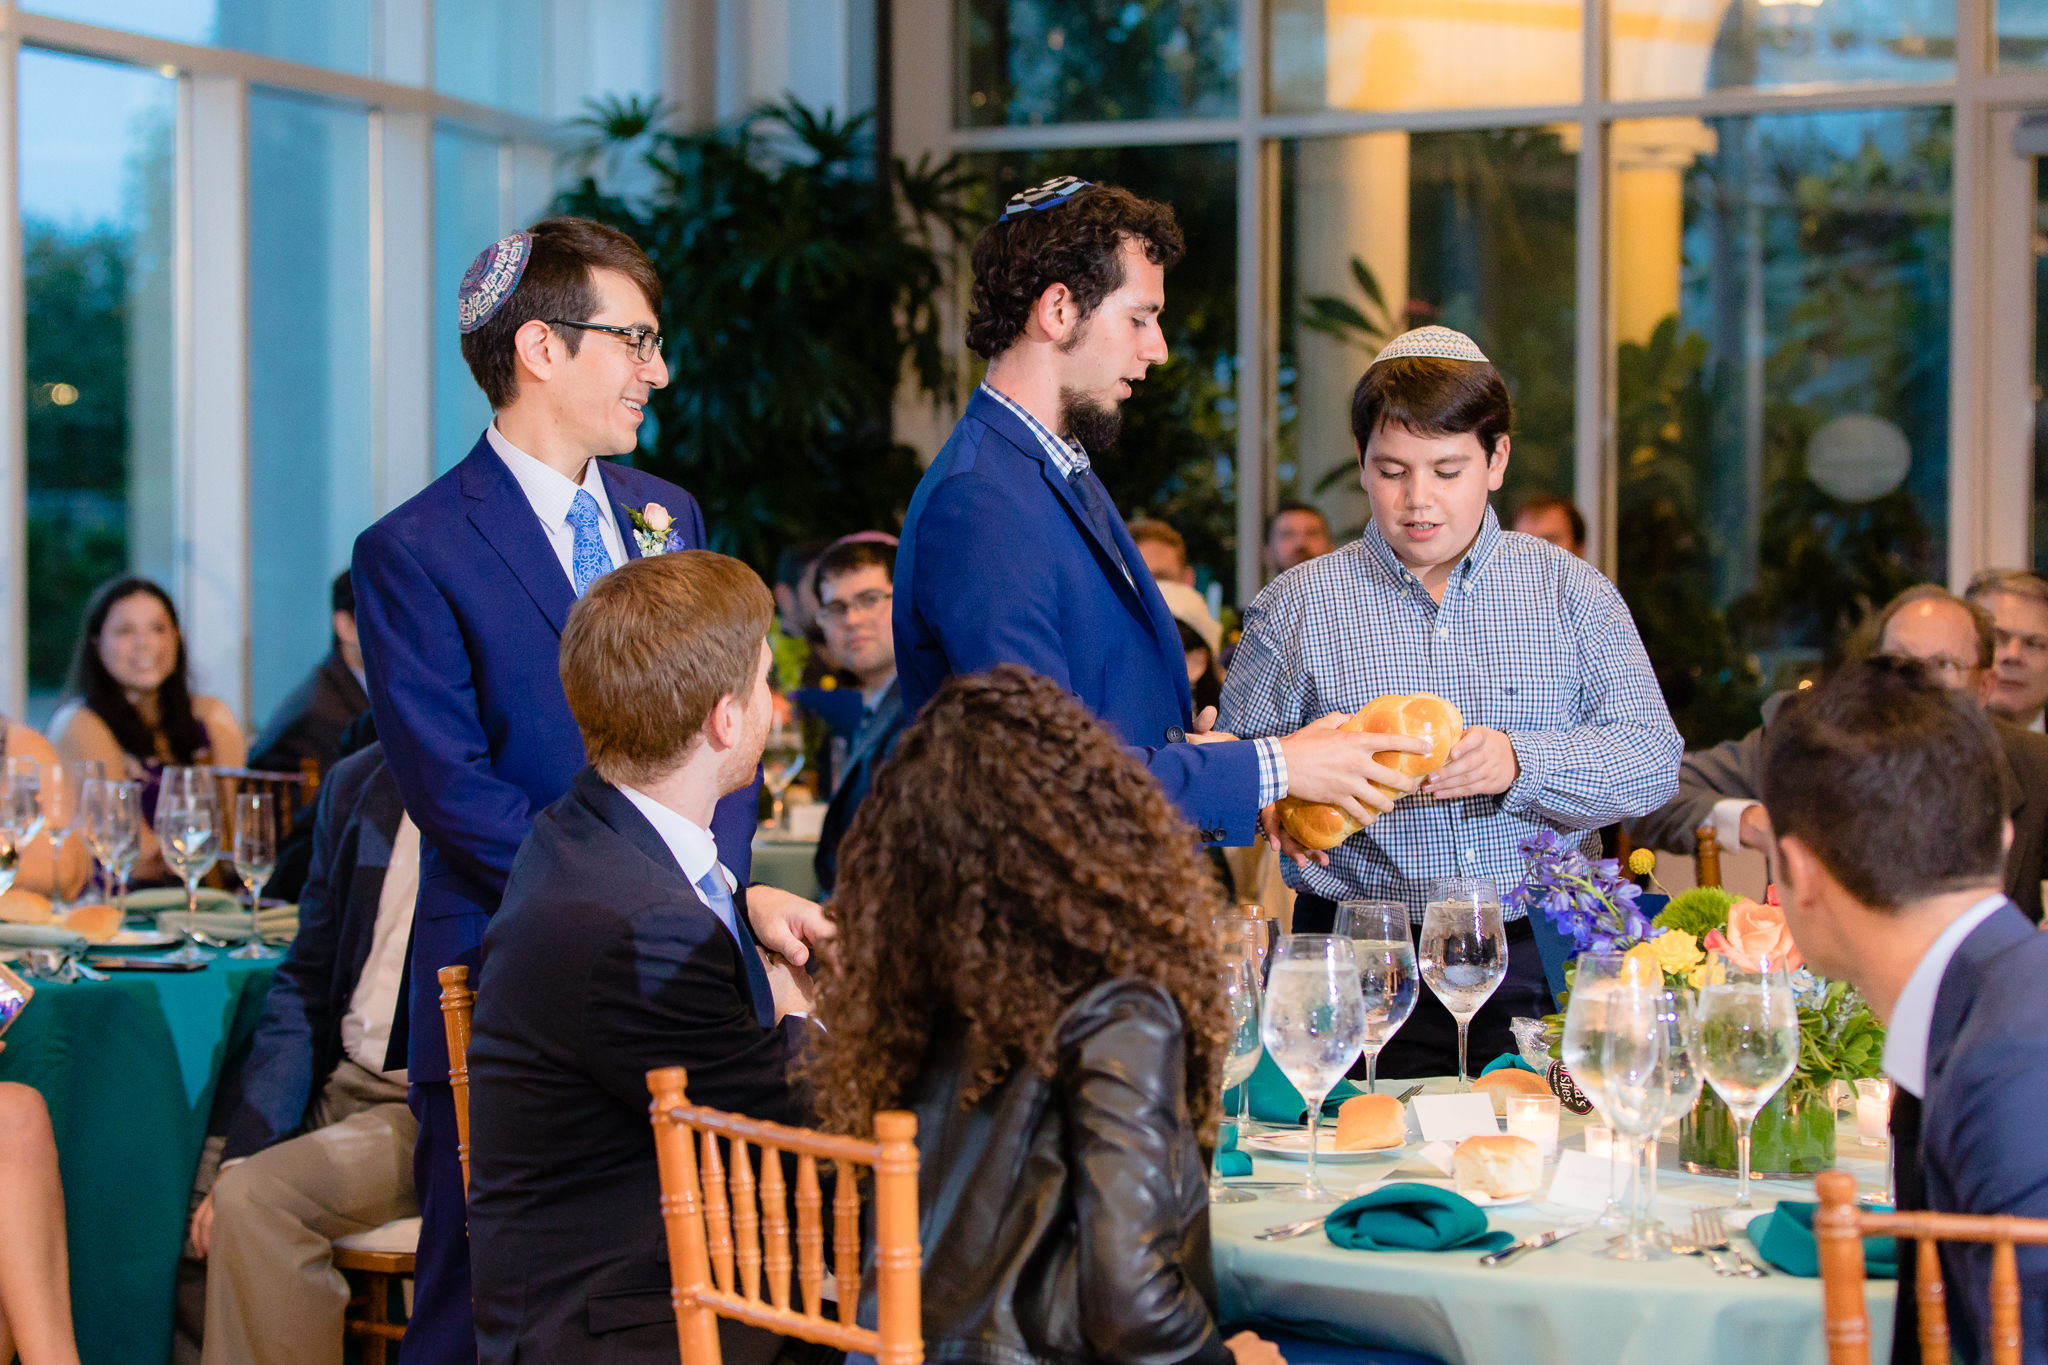 Brothers of the groom bless the Challah at a Jewish wedding reception at Phipps Conservatory